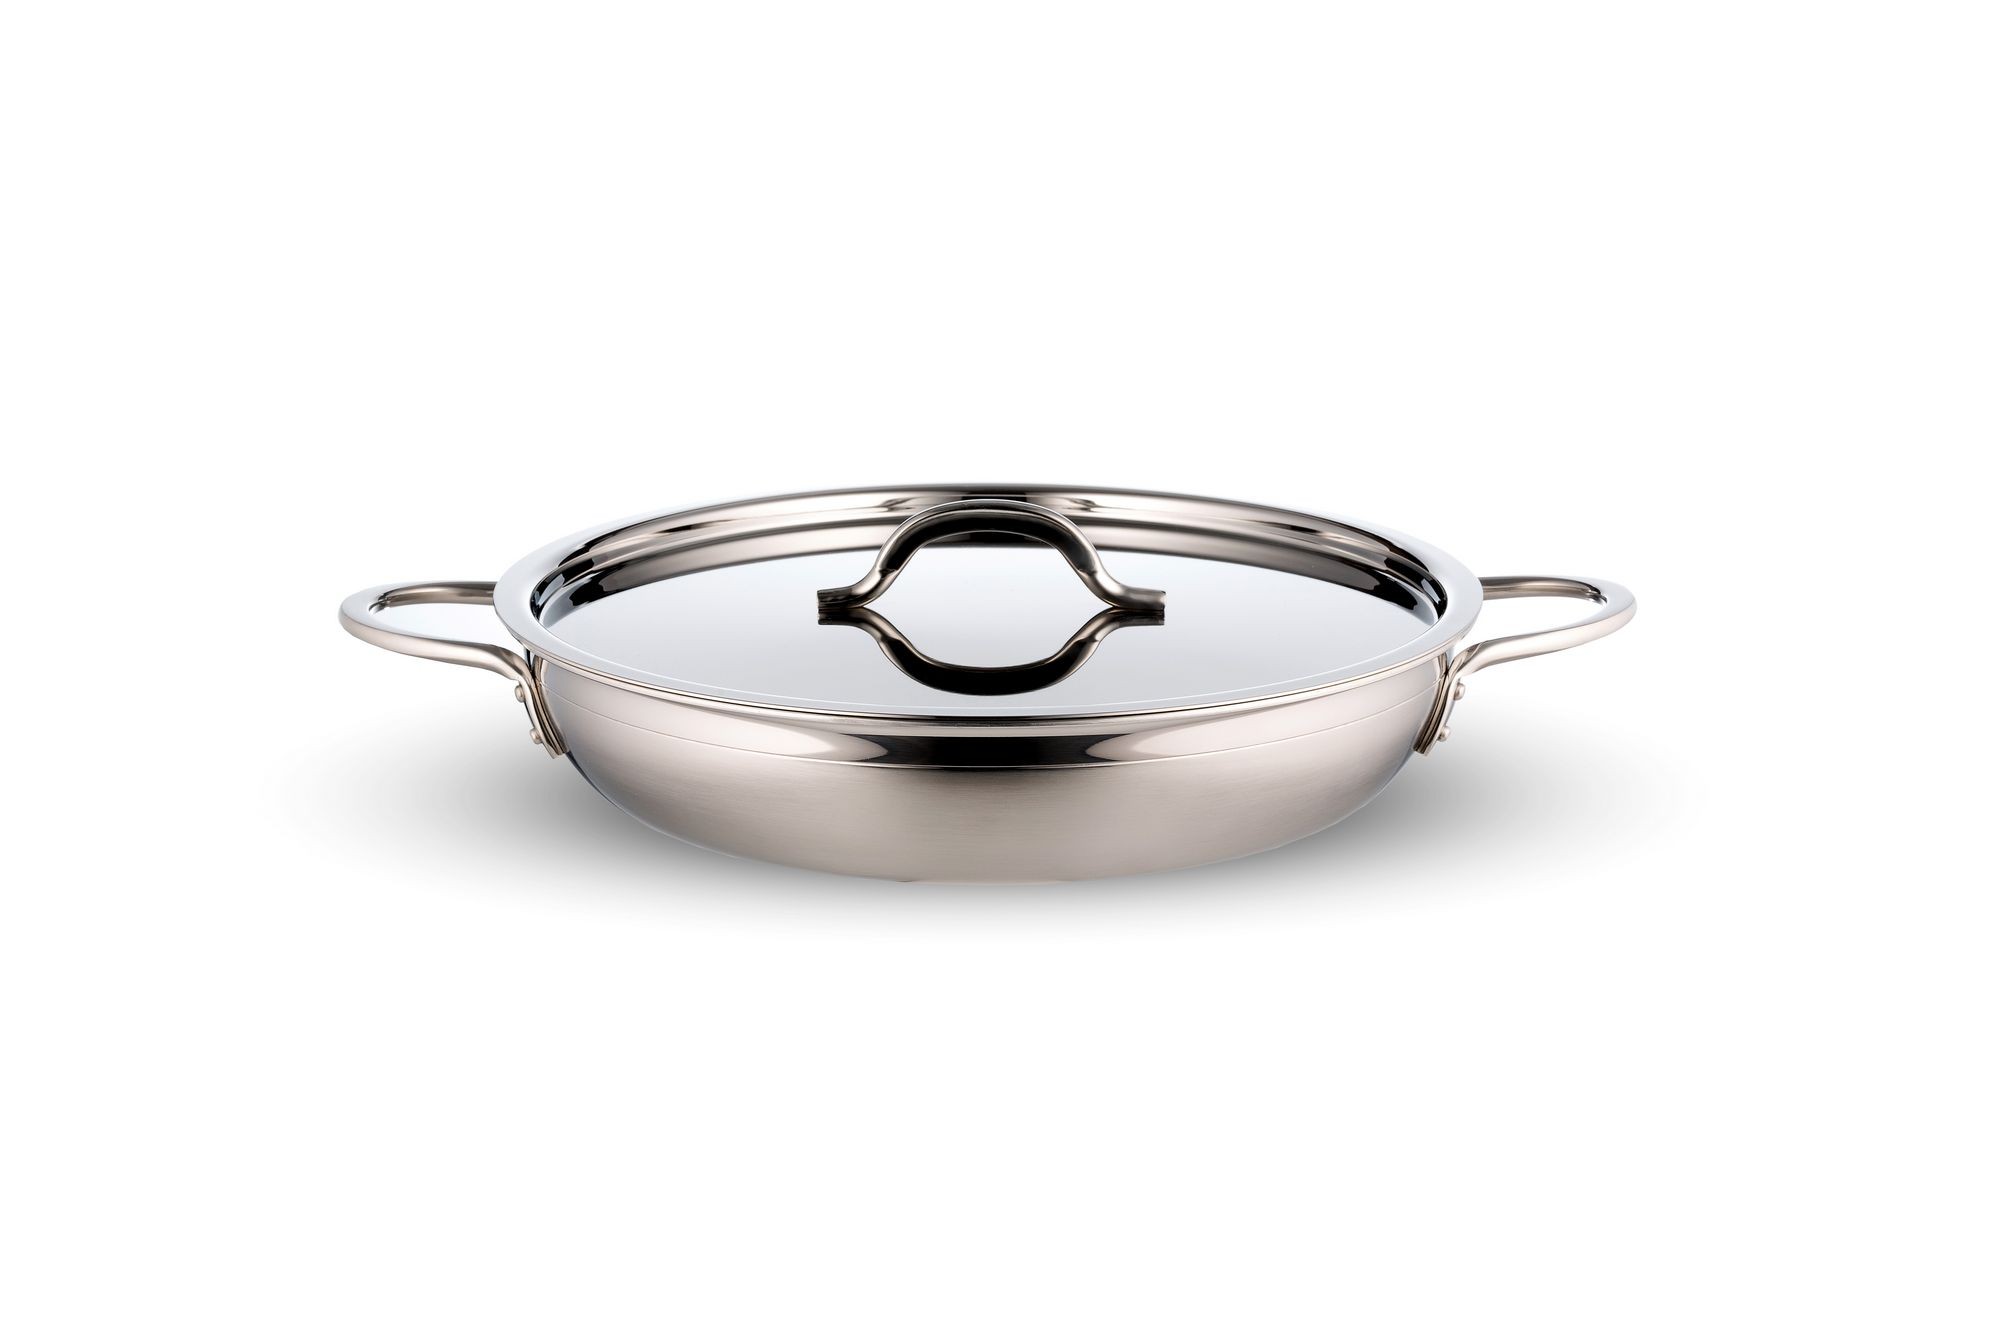 Bon Chef 60305-2ToneSS Country French Two Tone Stainless Steel Saute Pan with Cover, Double Handle, 2 Qt. 12 oz.